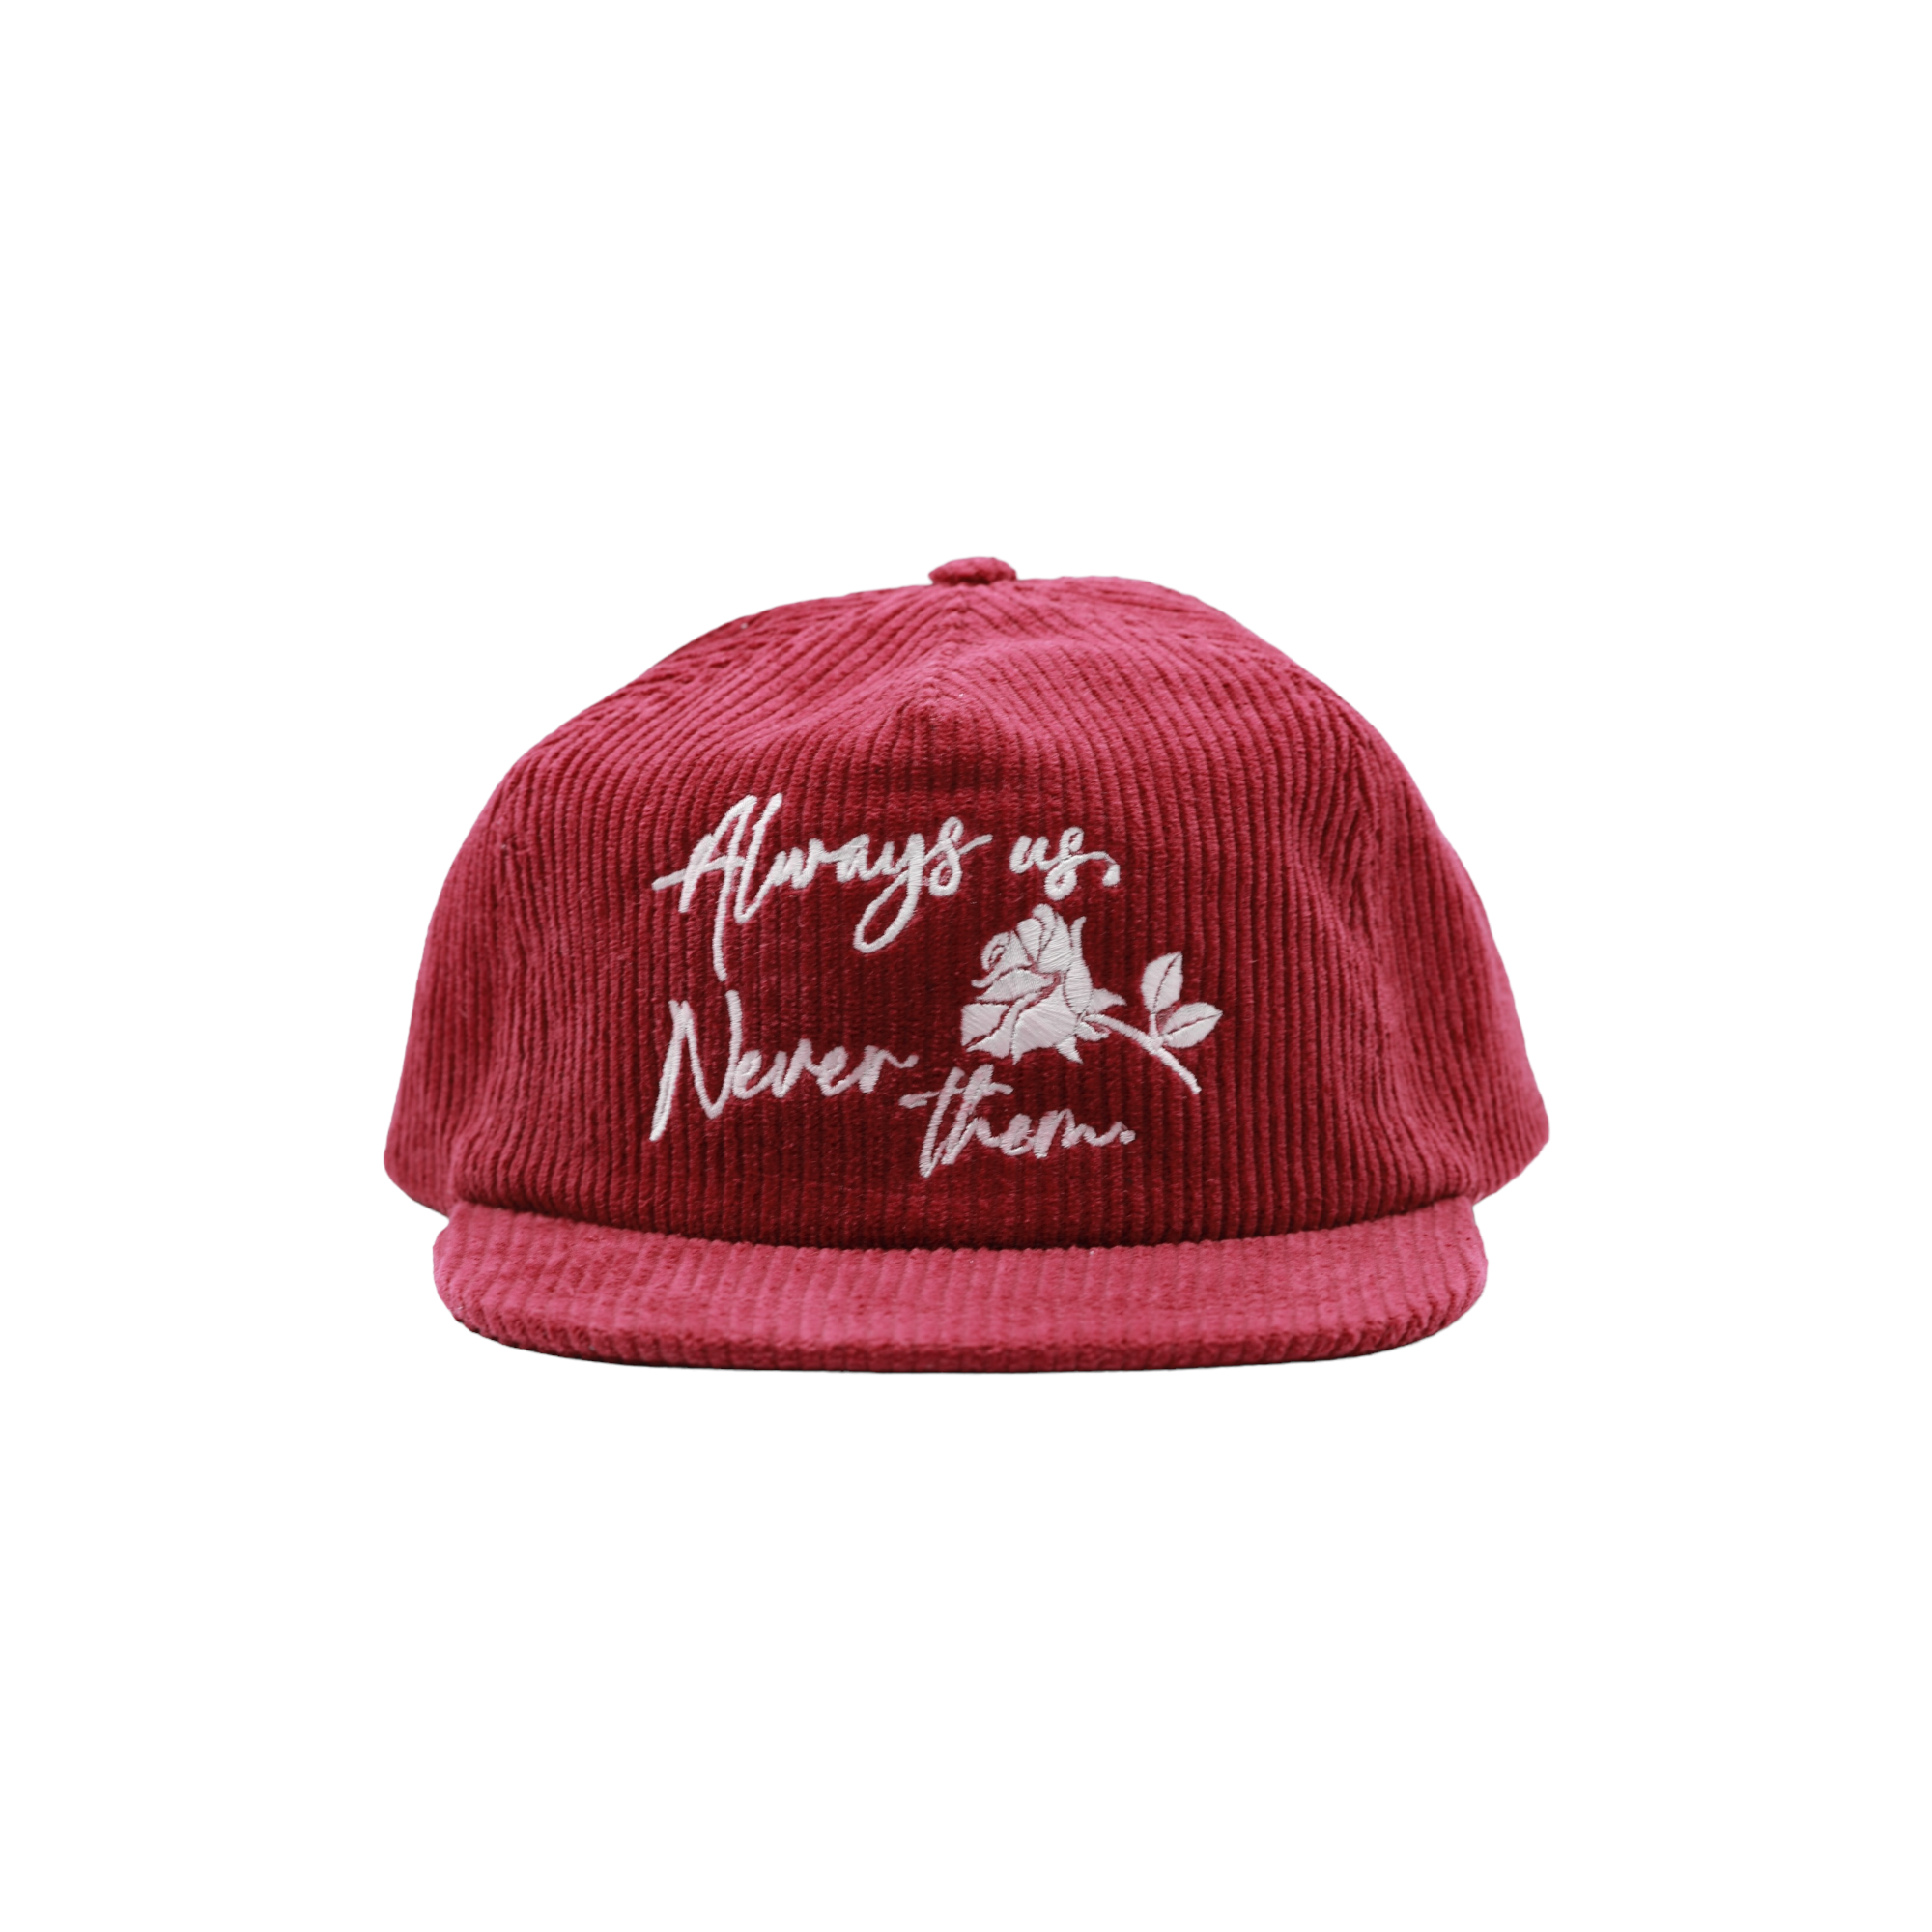 Always Us, Never PericoLimited Painters Cap Burgundy – Corduroy - Them